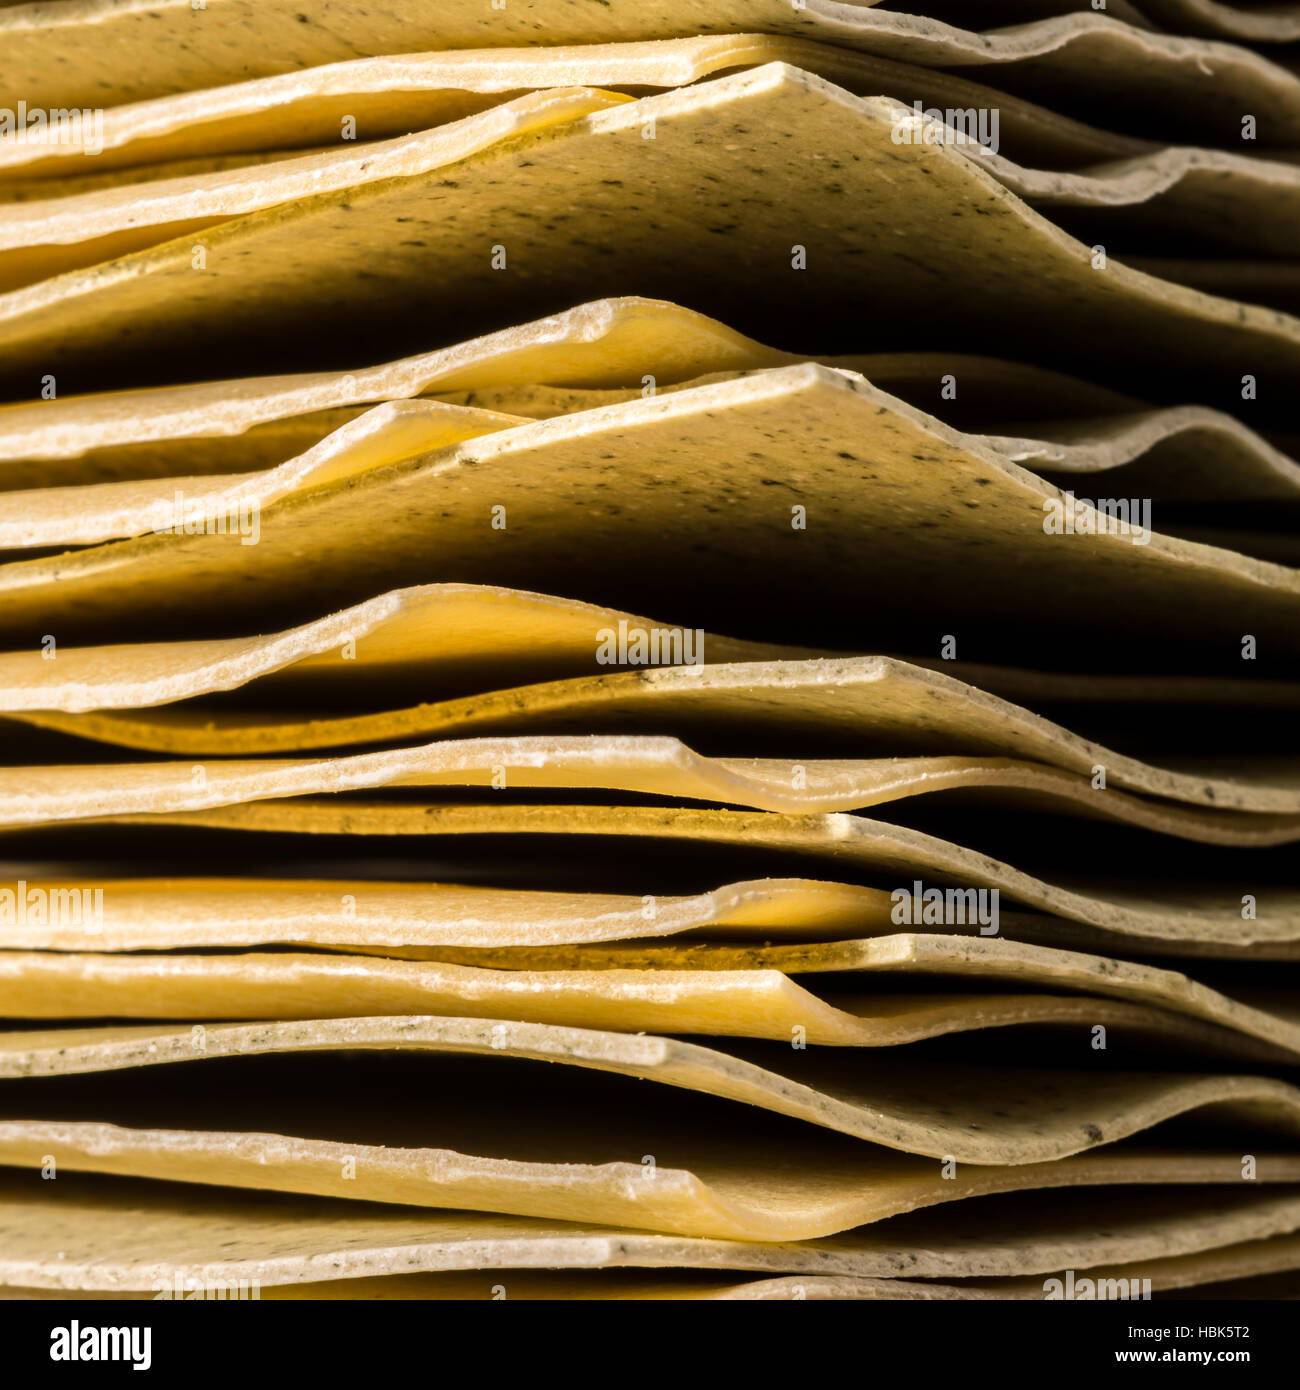 Up close view of pieces of raw lasagne Stock Photo